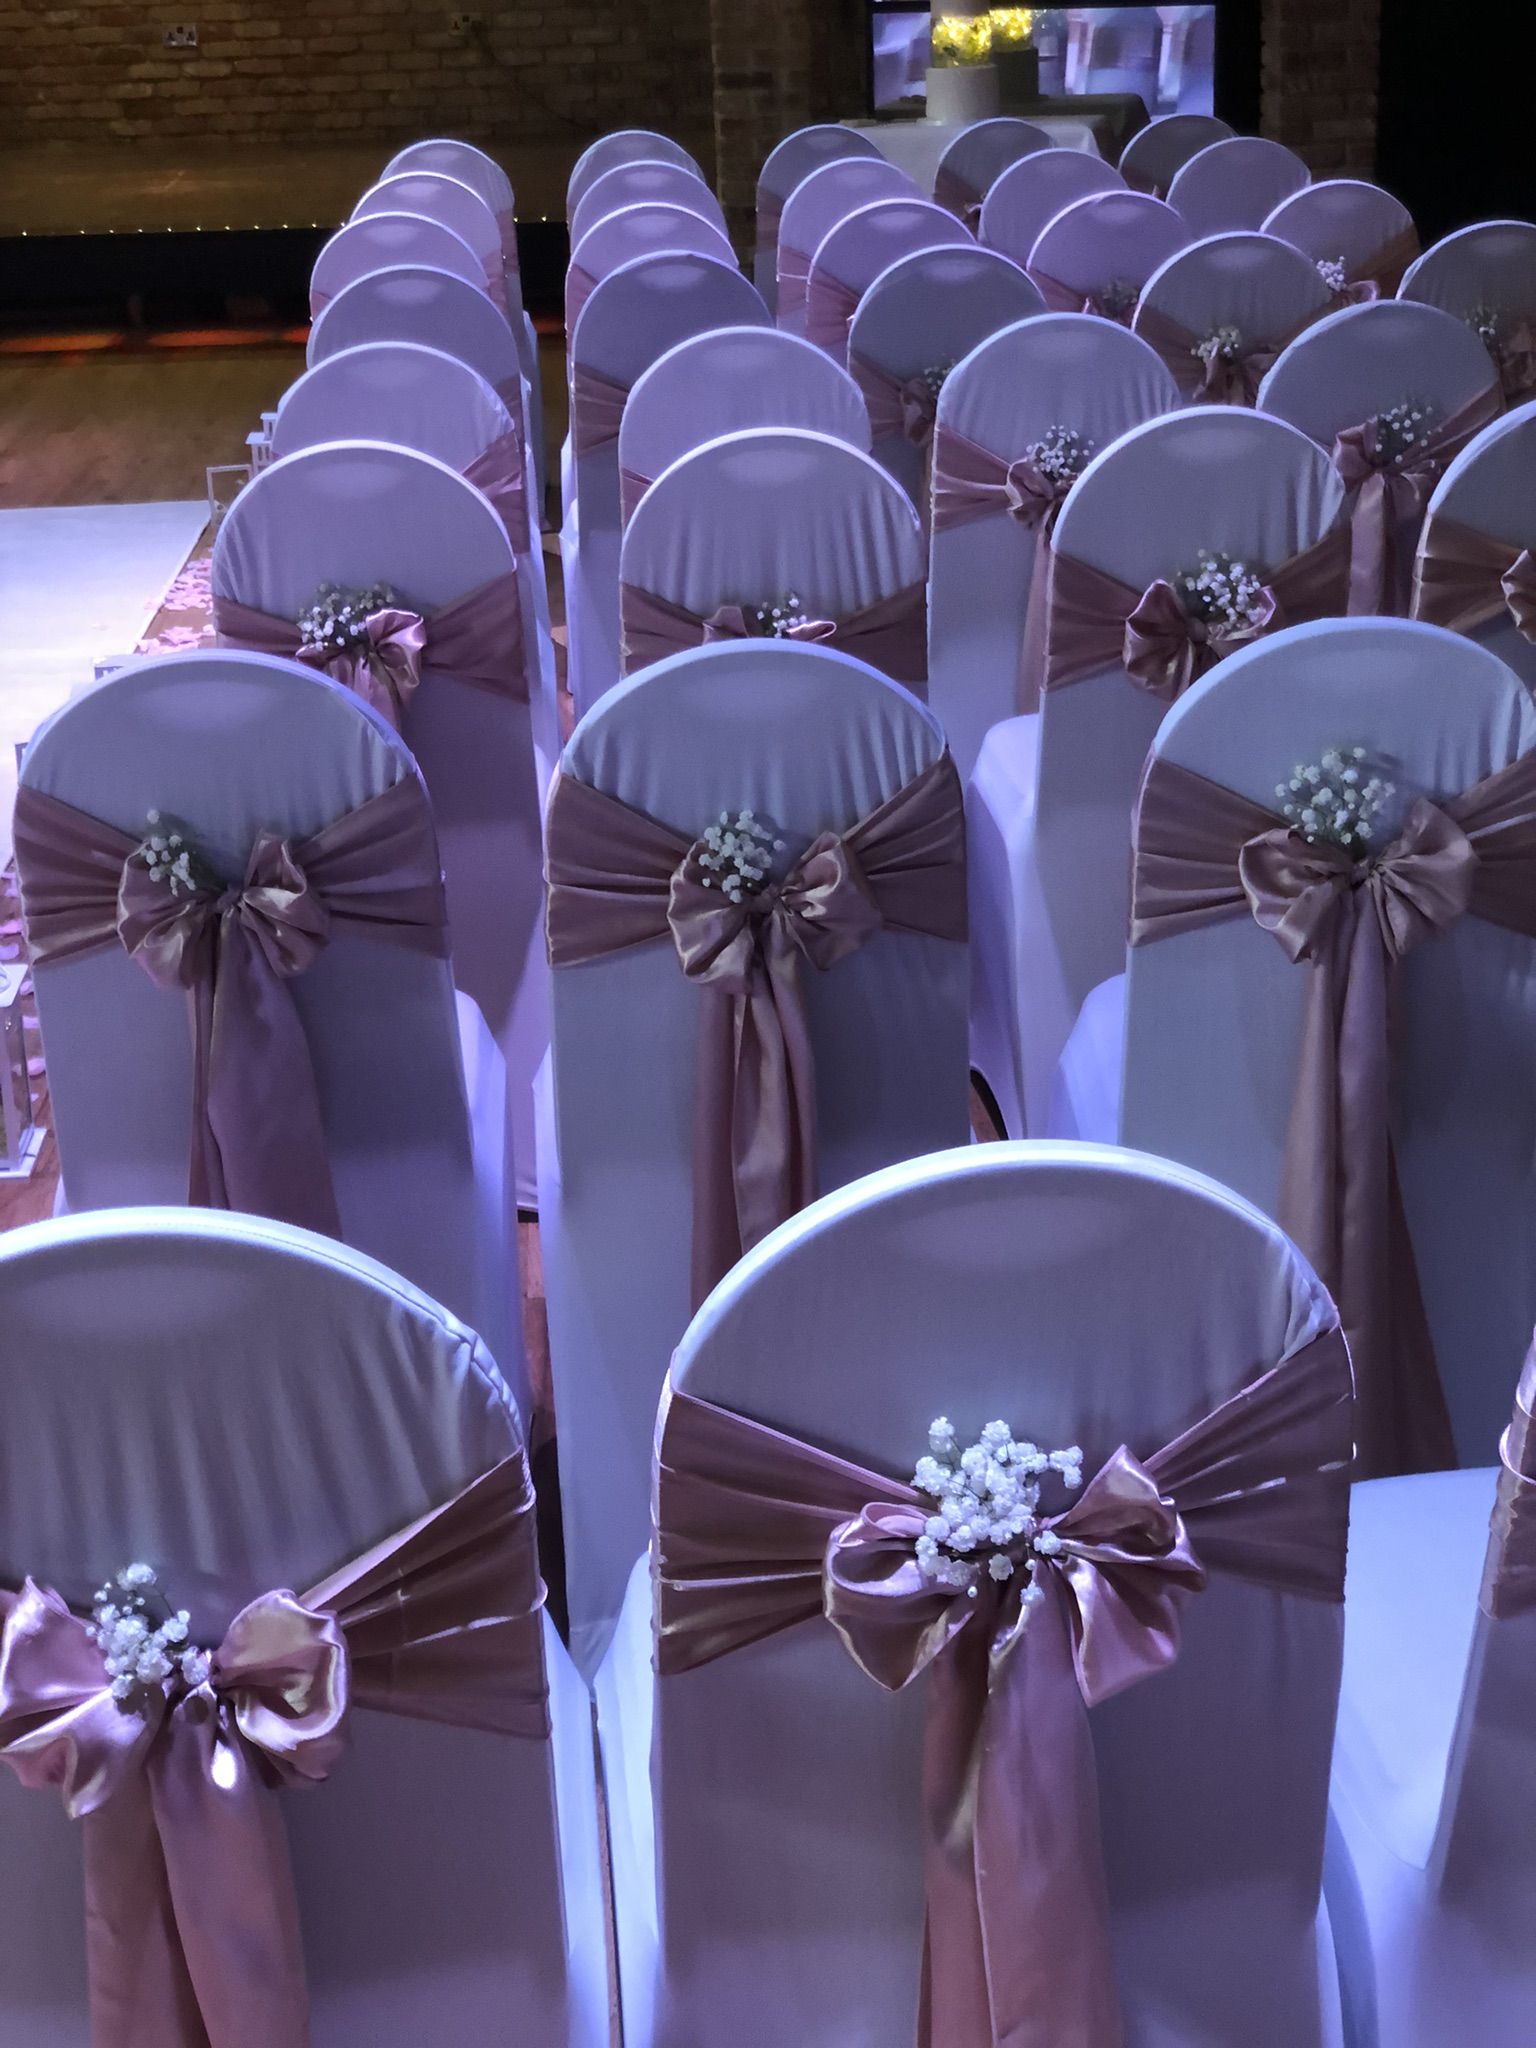 rows of chairs covered in purple sashes and bows.